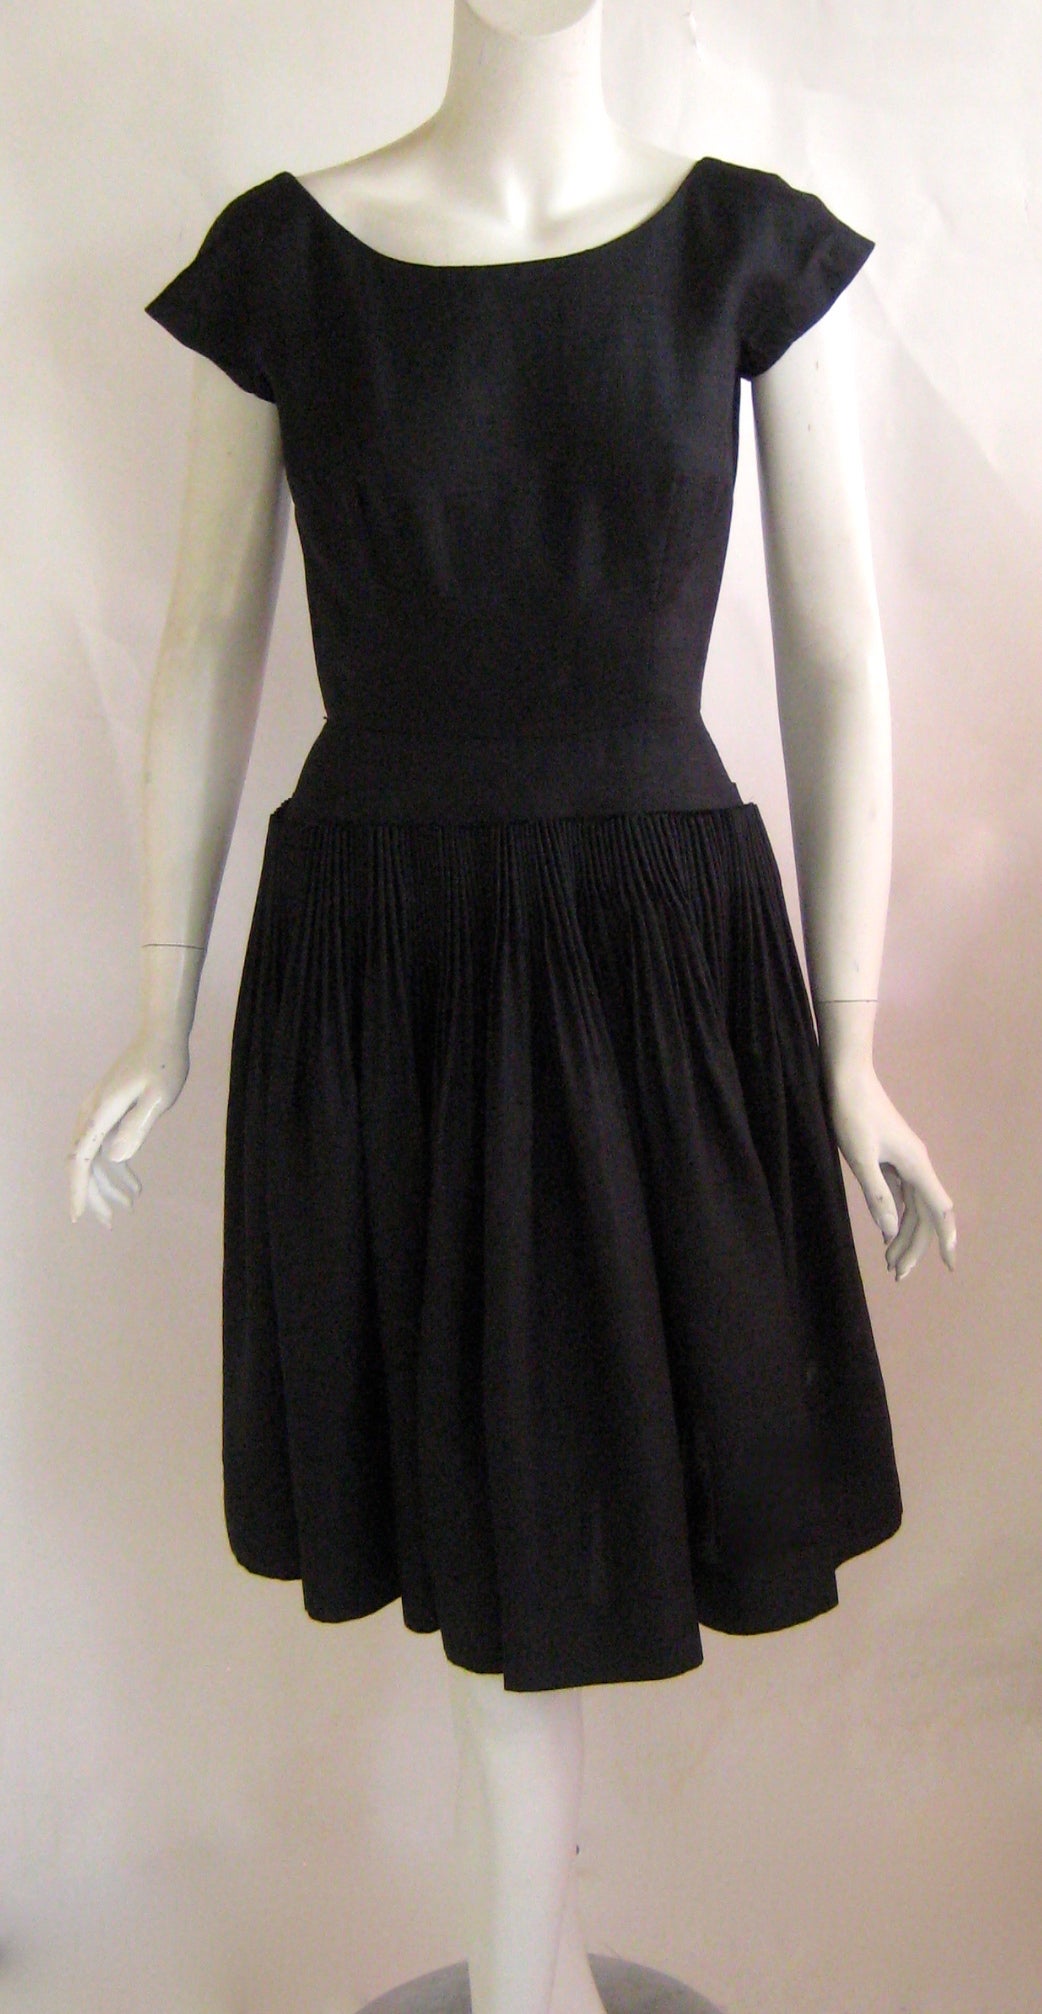 Perfect little black dress by Karen Stark for Harvey Berin.This is made of 100% raw silk and the skirt is cartridge pleated all the way around .THe bodice buttons up with 2 large plastic buttons and the there is short metal zip in the back of the